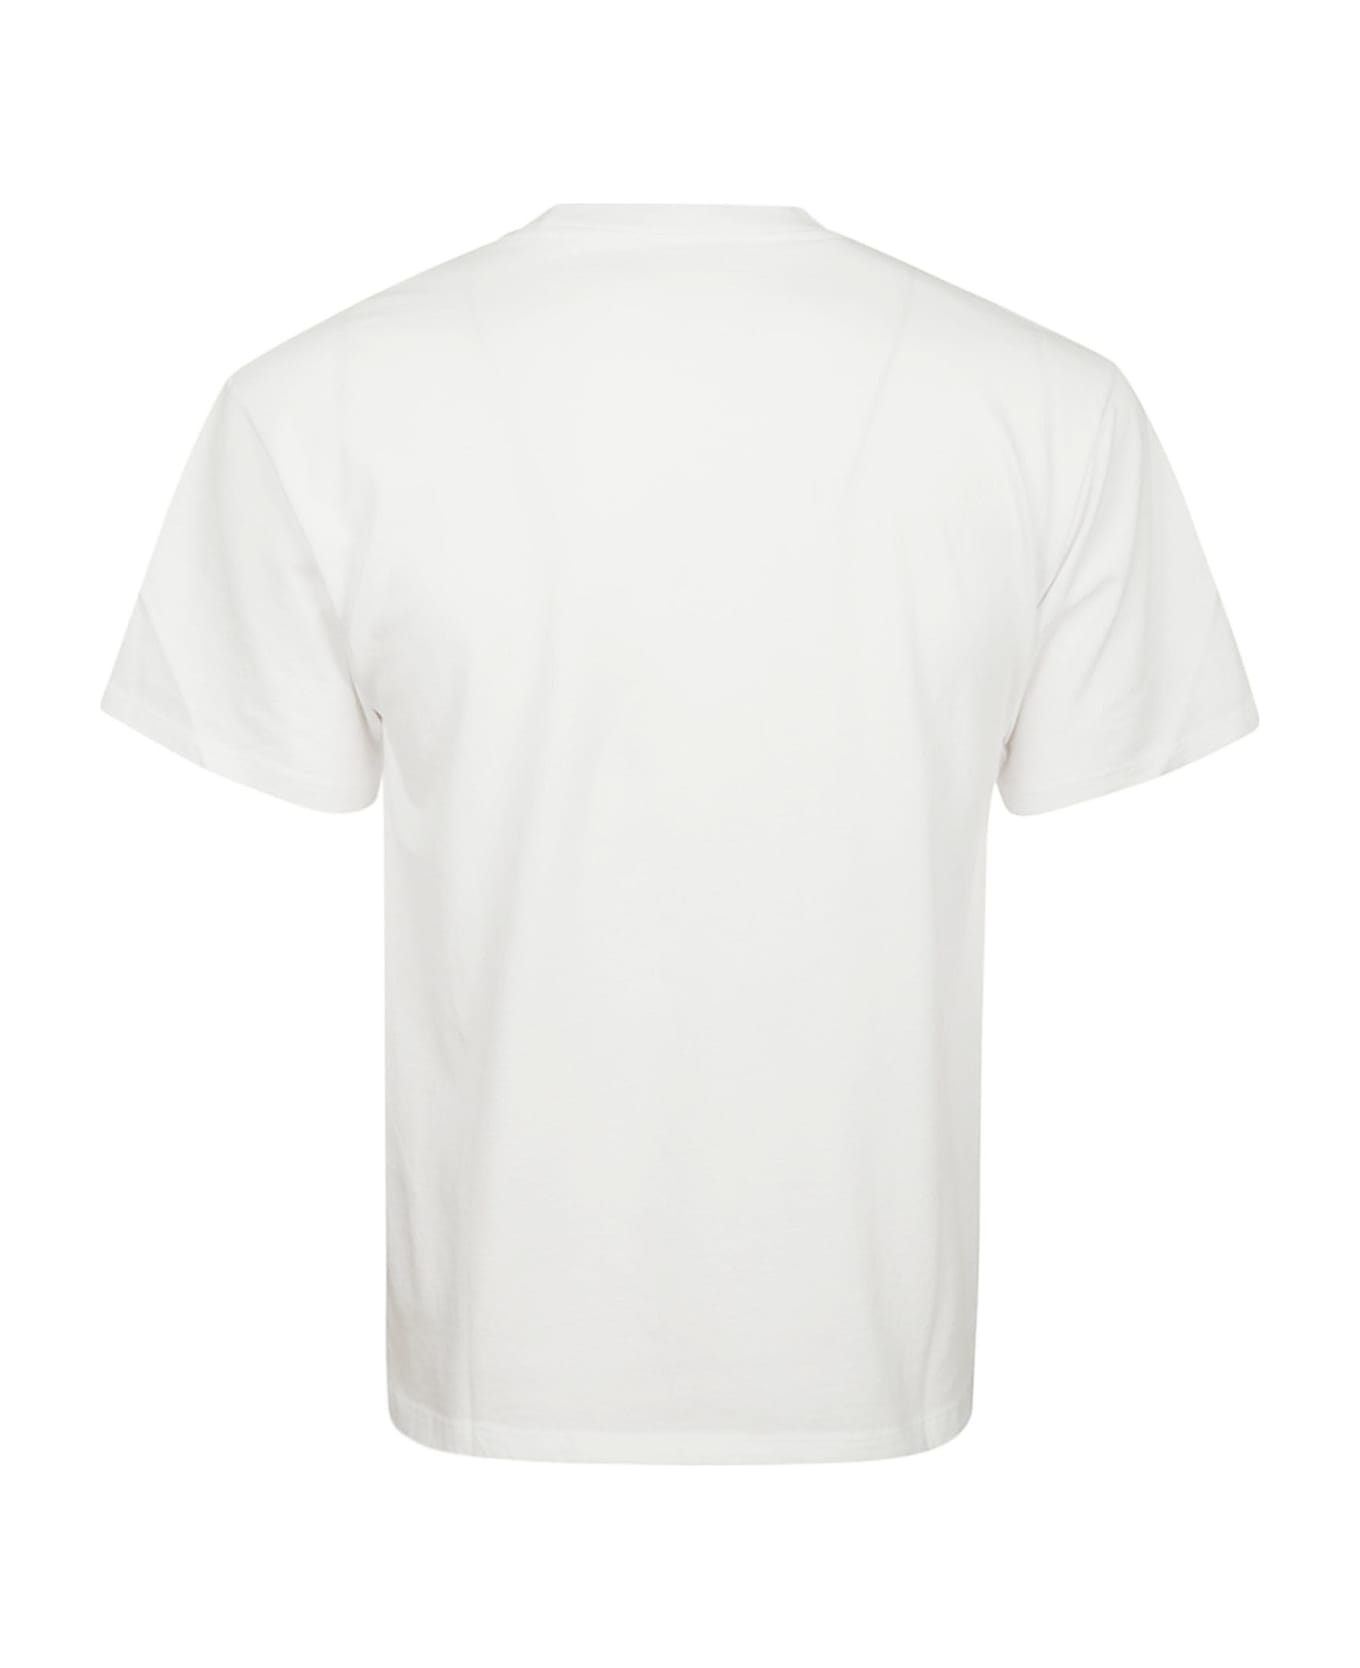 Aries Connecting Ss Tee - Wht White